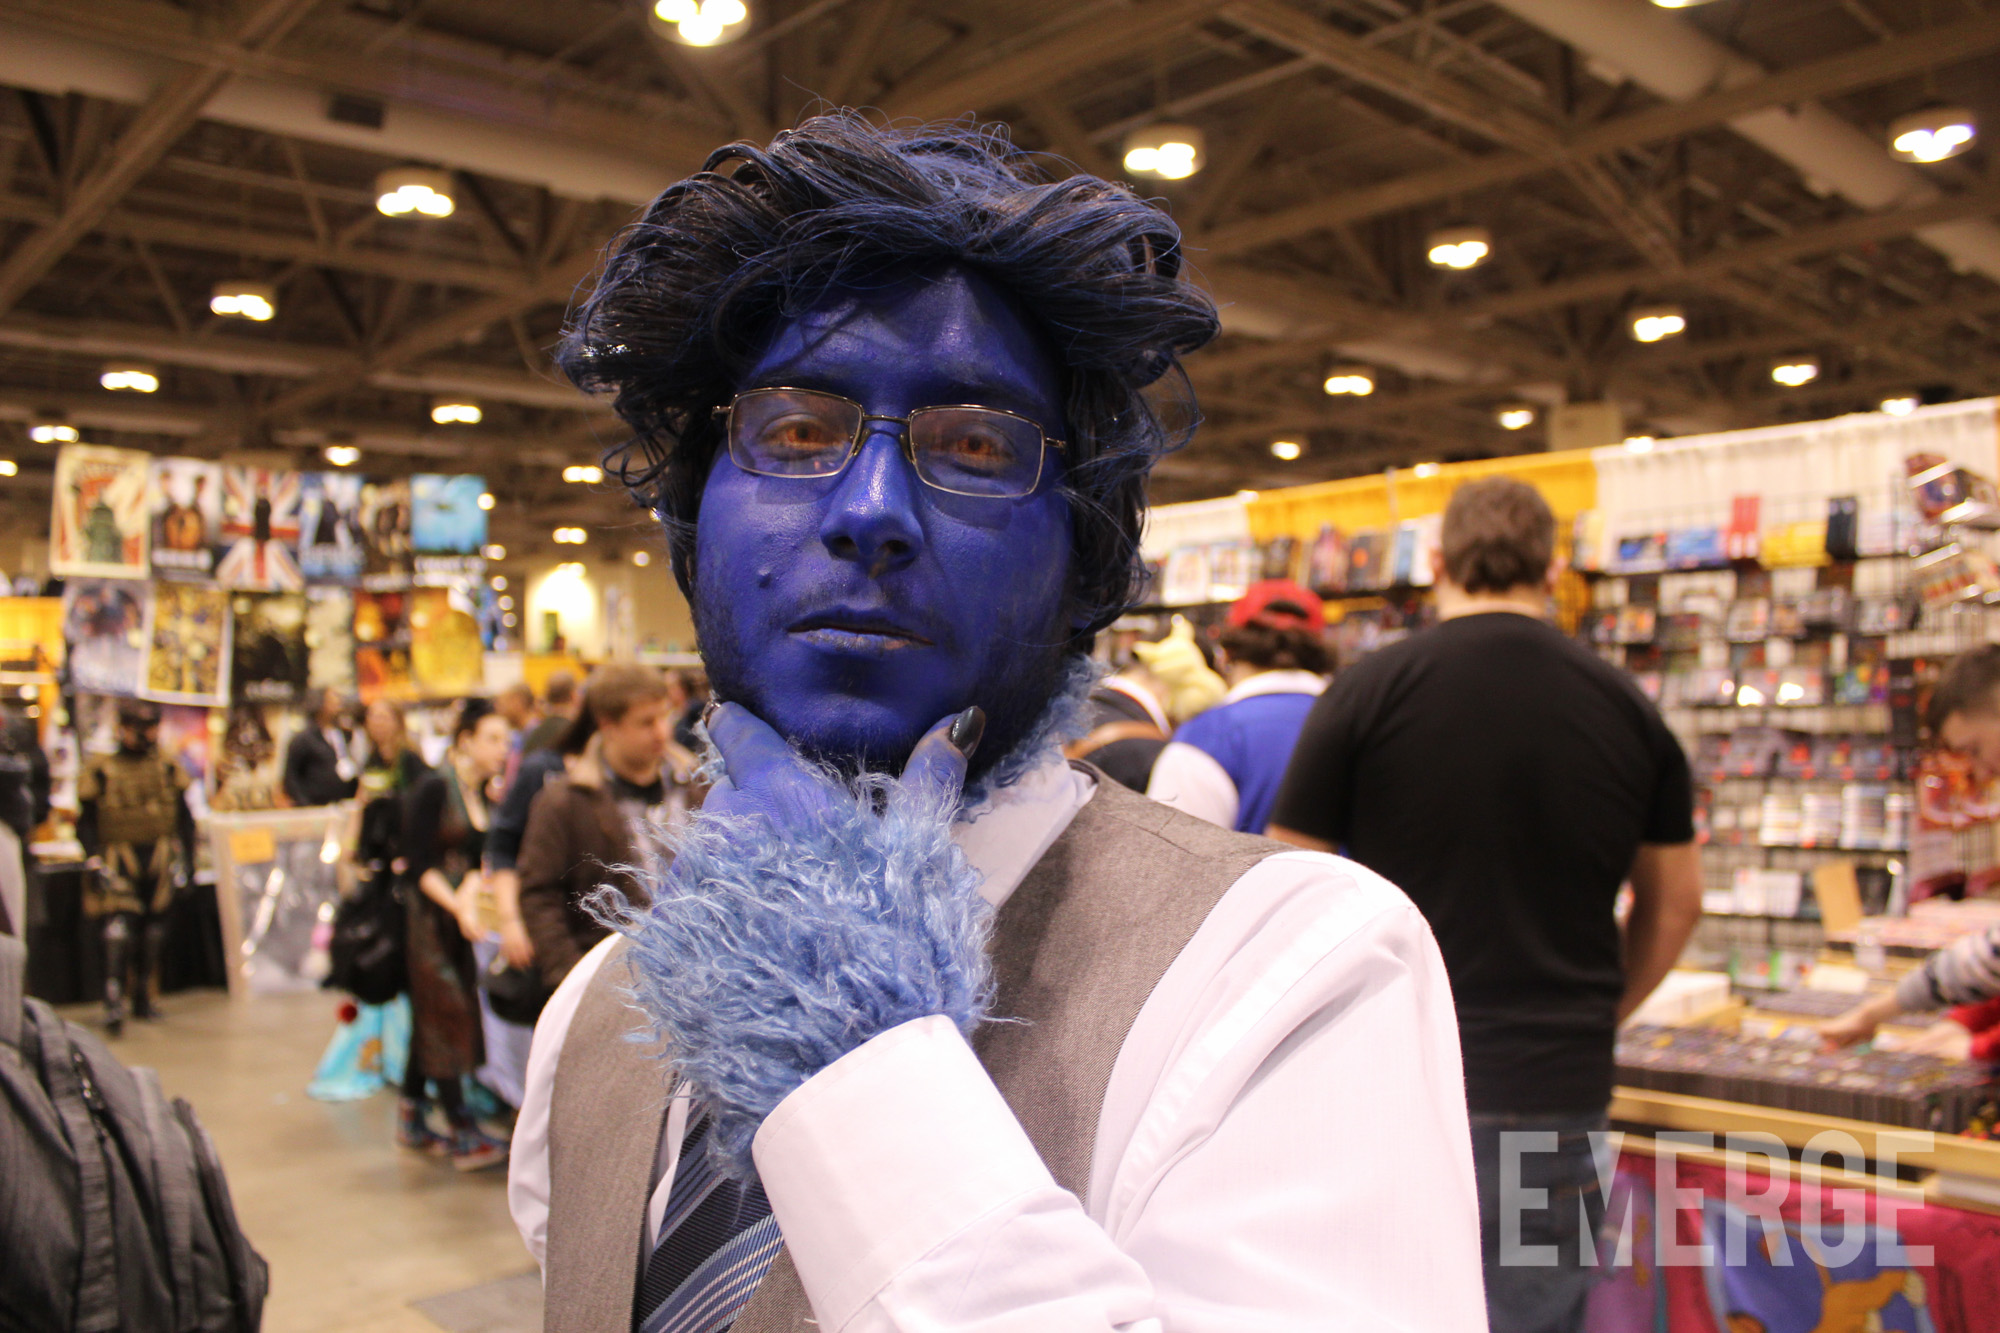 Kelsey Grammar or not, this Beast cosplay from X-men was authentic